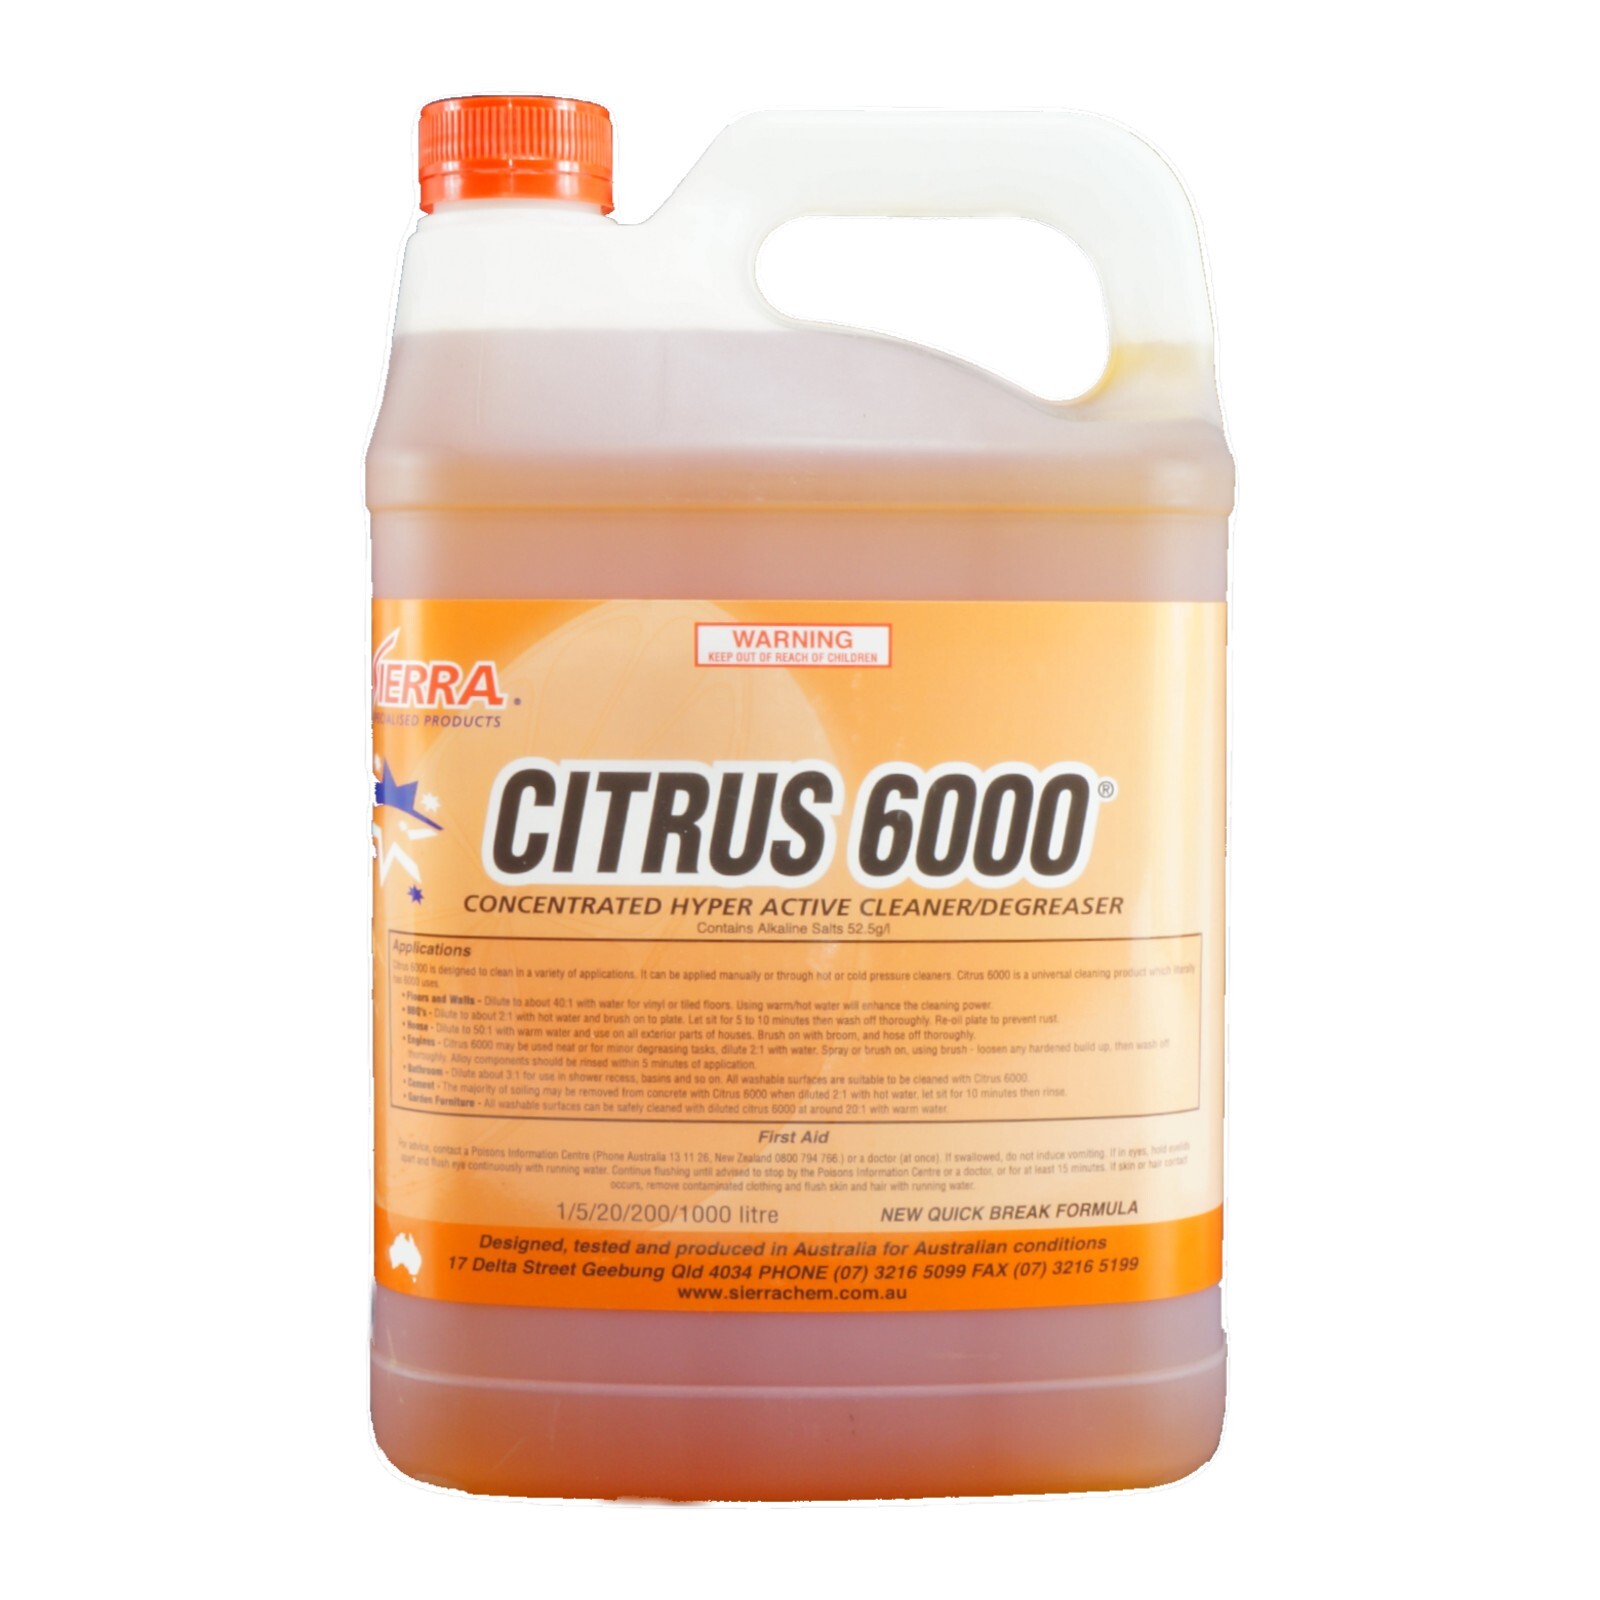 Sierra Citrus 6000 Highly Concentrated Hyperactive Multipurpose Cleaner / Degreaser 5L